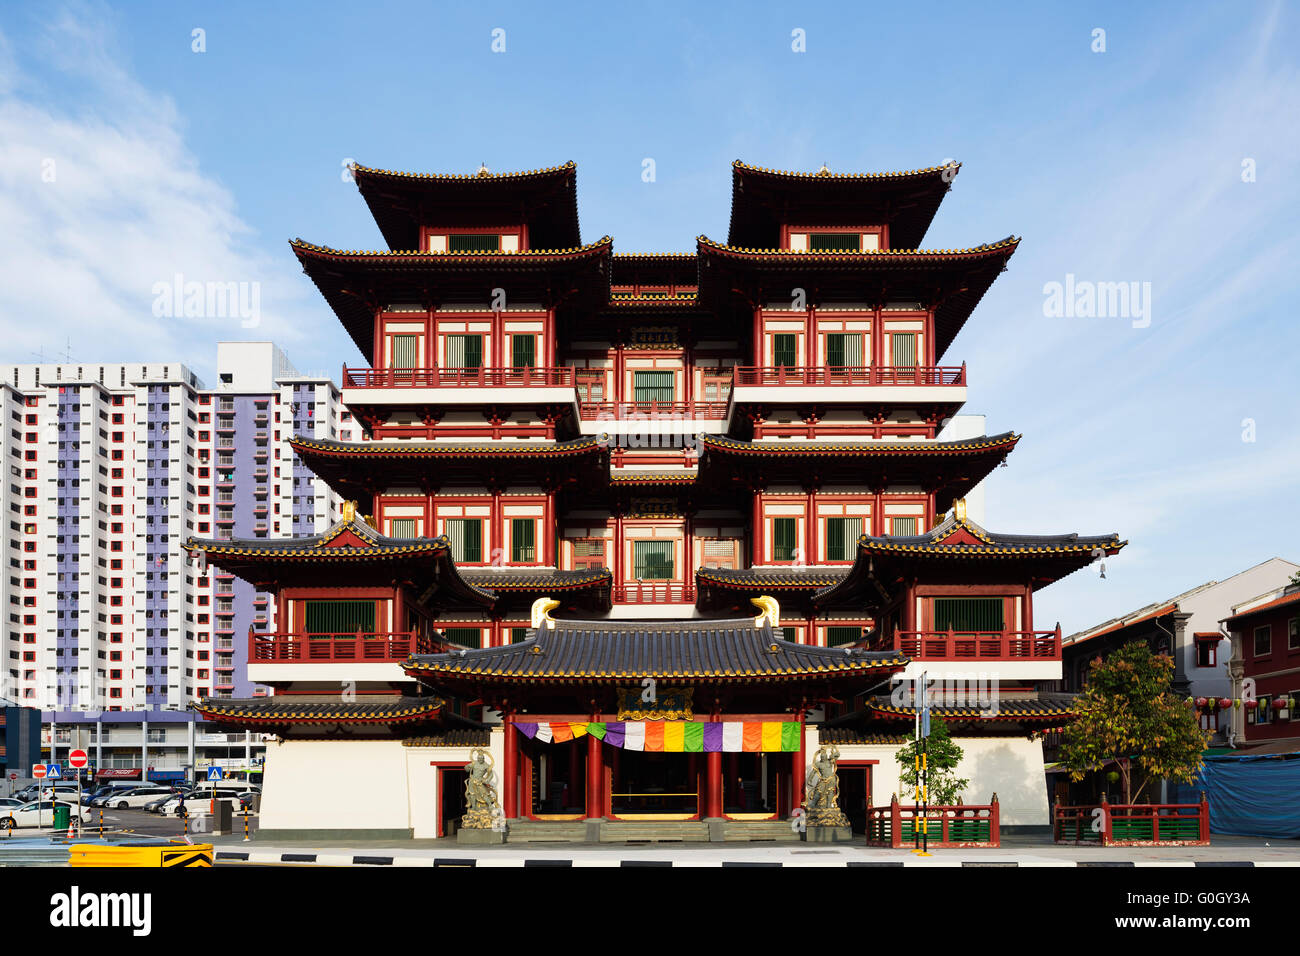 South East Asia, Singapore, Chinatown, Buddha Tooth Relic temple Stock Photo